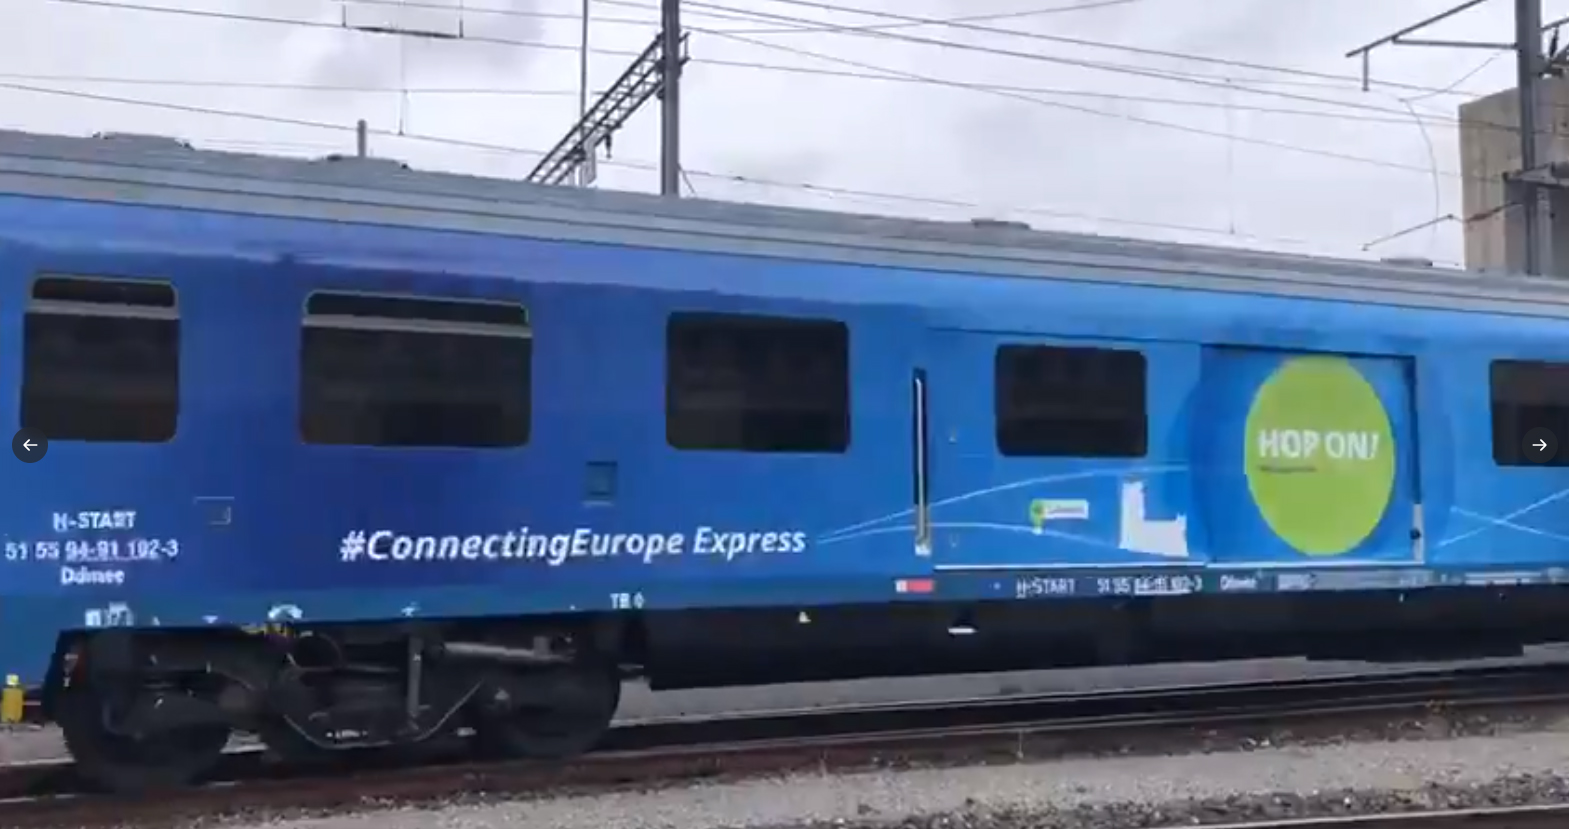 Connecting Europe Express train begins its fiveweek journey